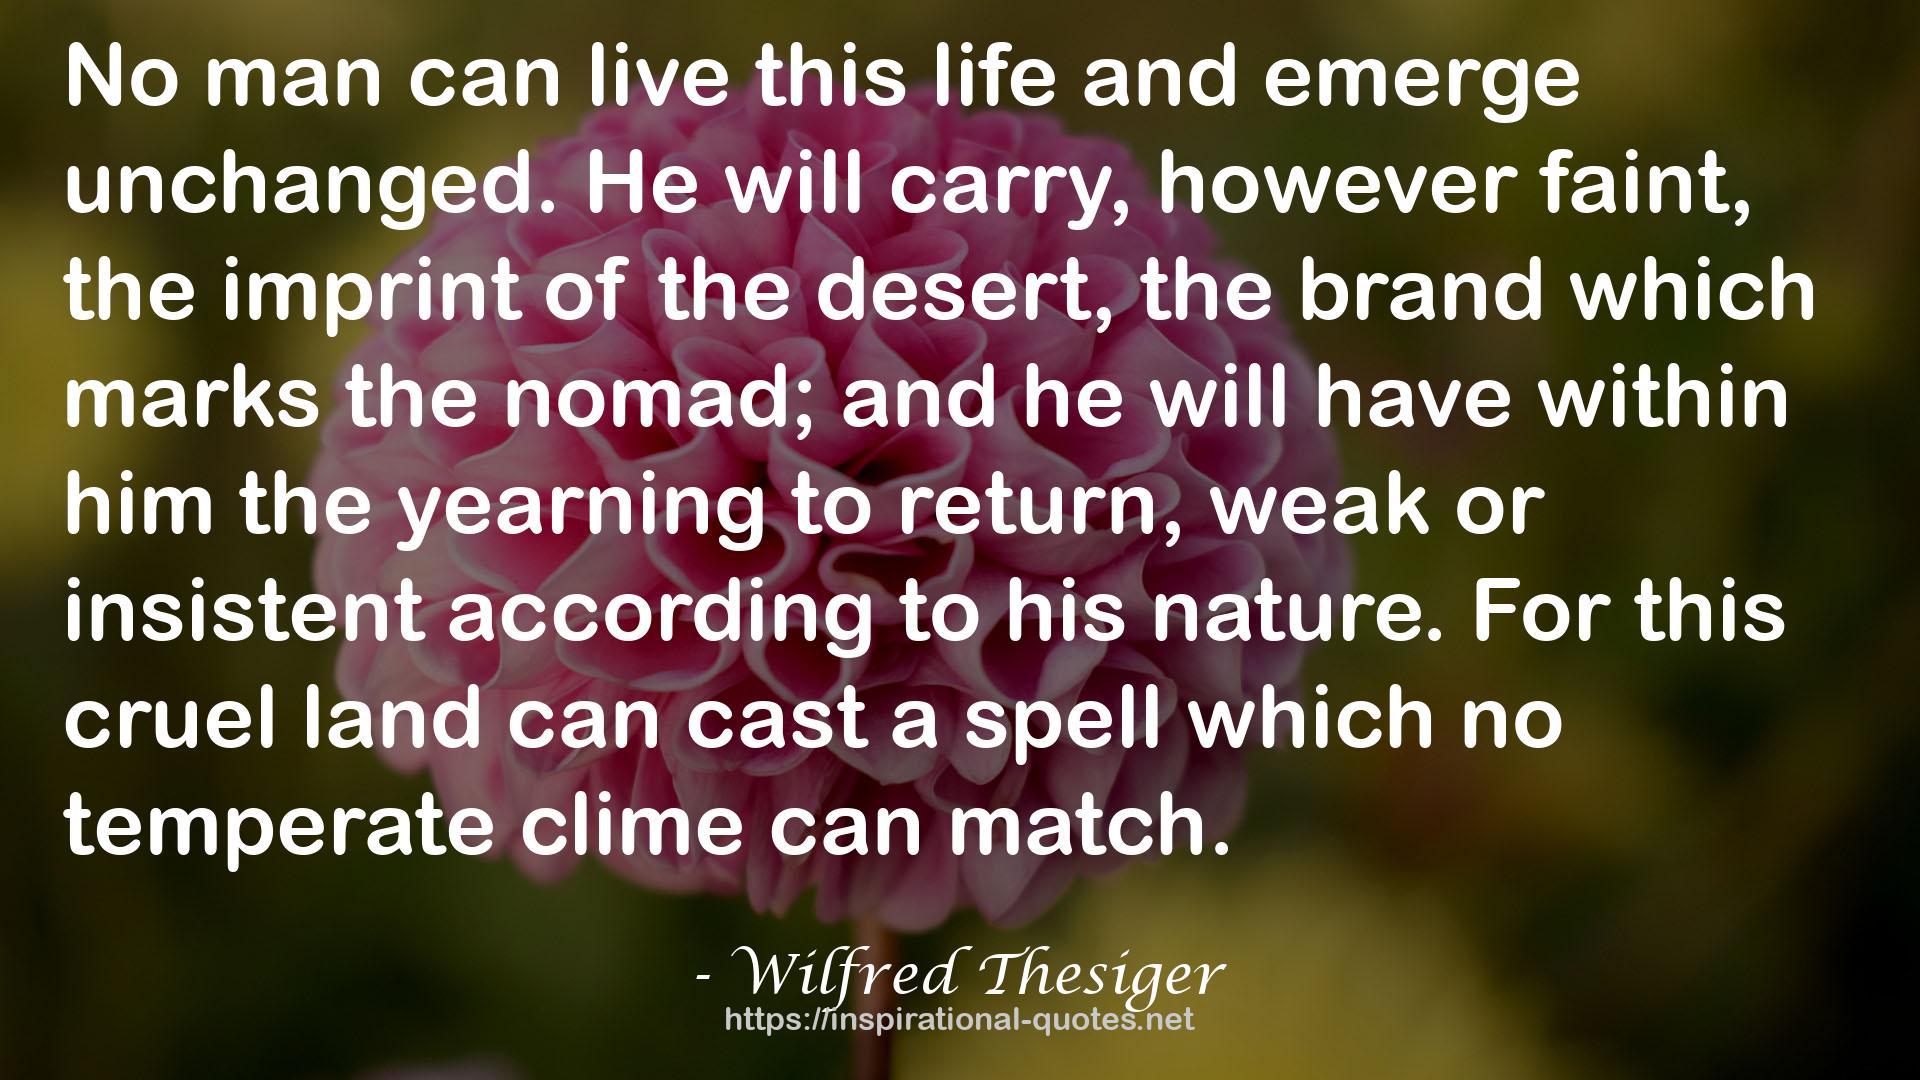 Wilfred Thesiger QUOTES